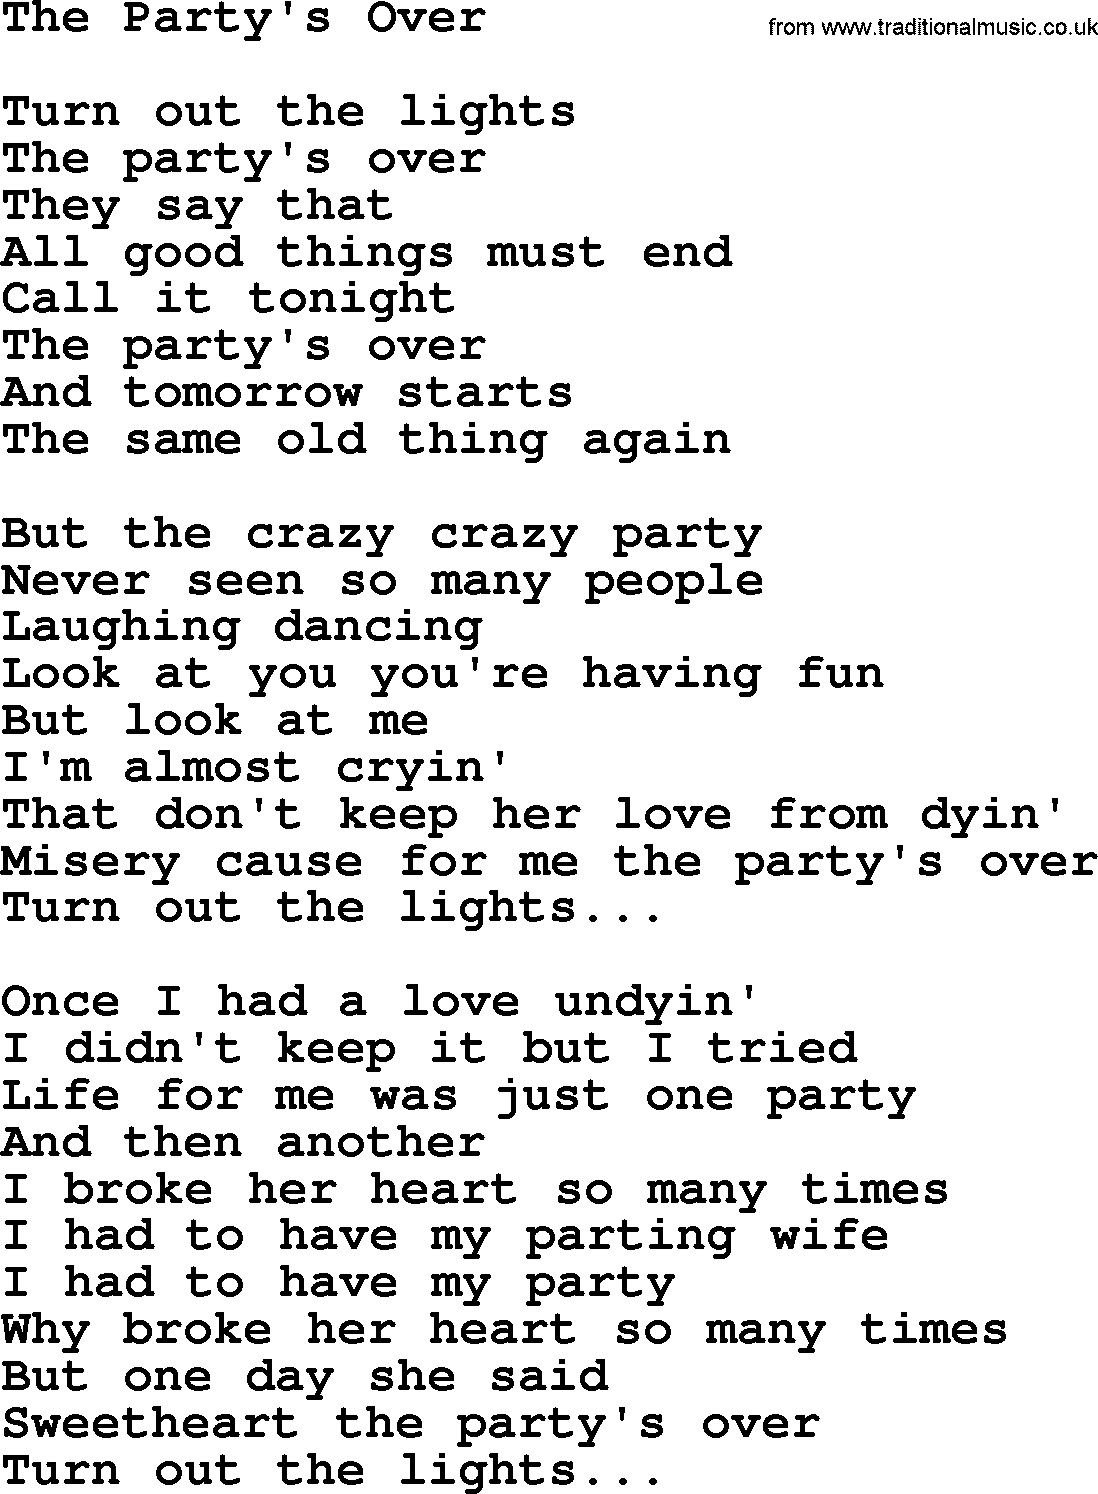 Willie Nelson song: The Party's Over lyrics